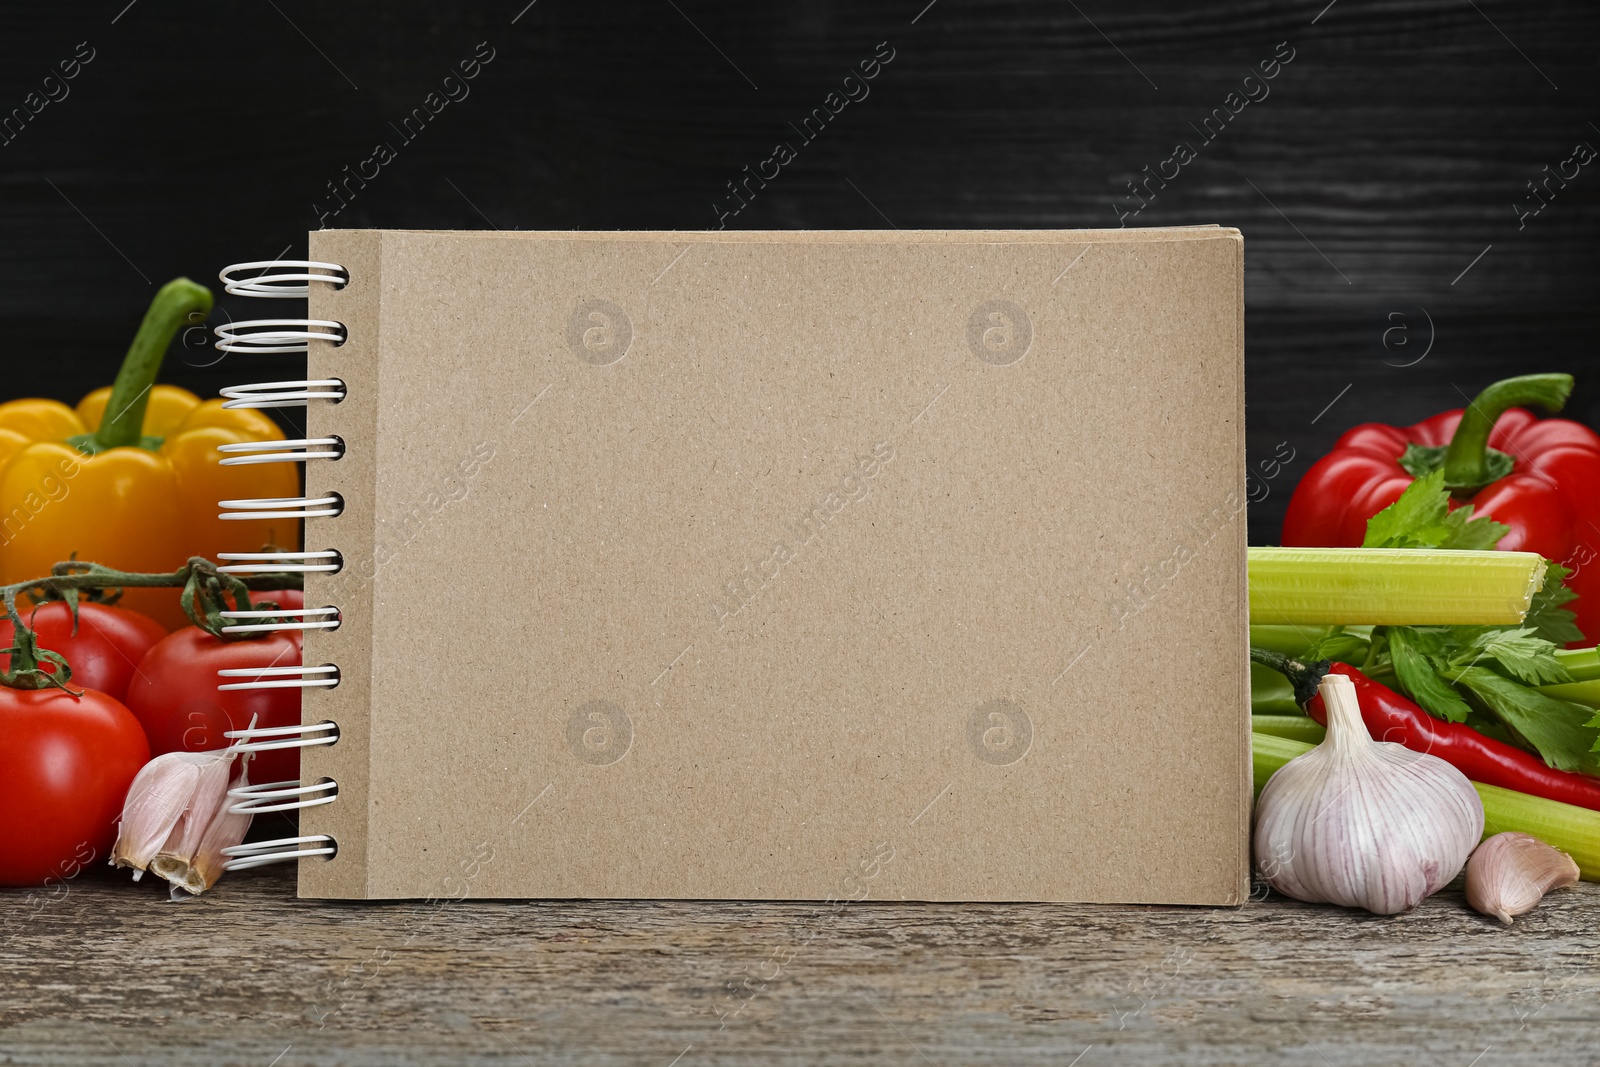 Photo of Blank recipe book and different ingredients on wooden table